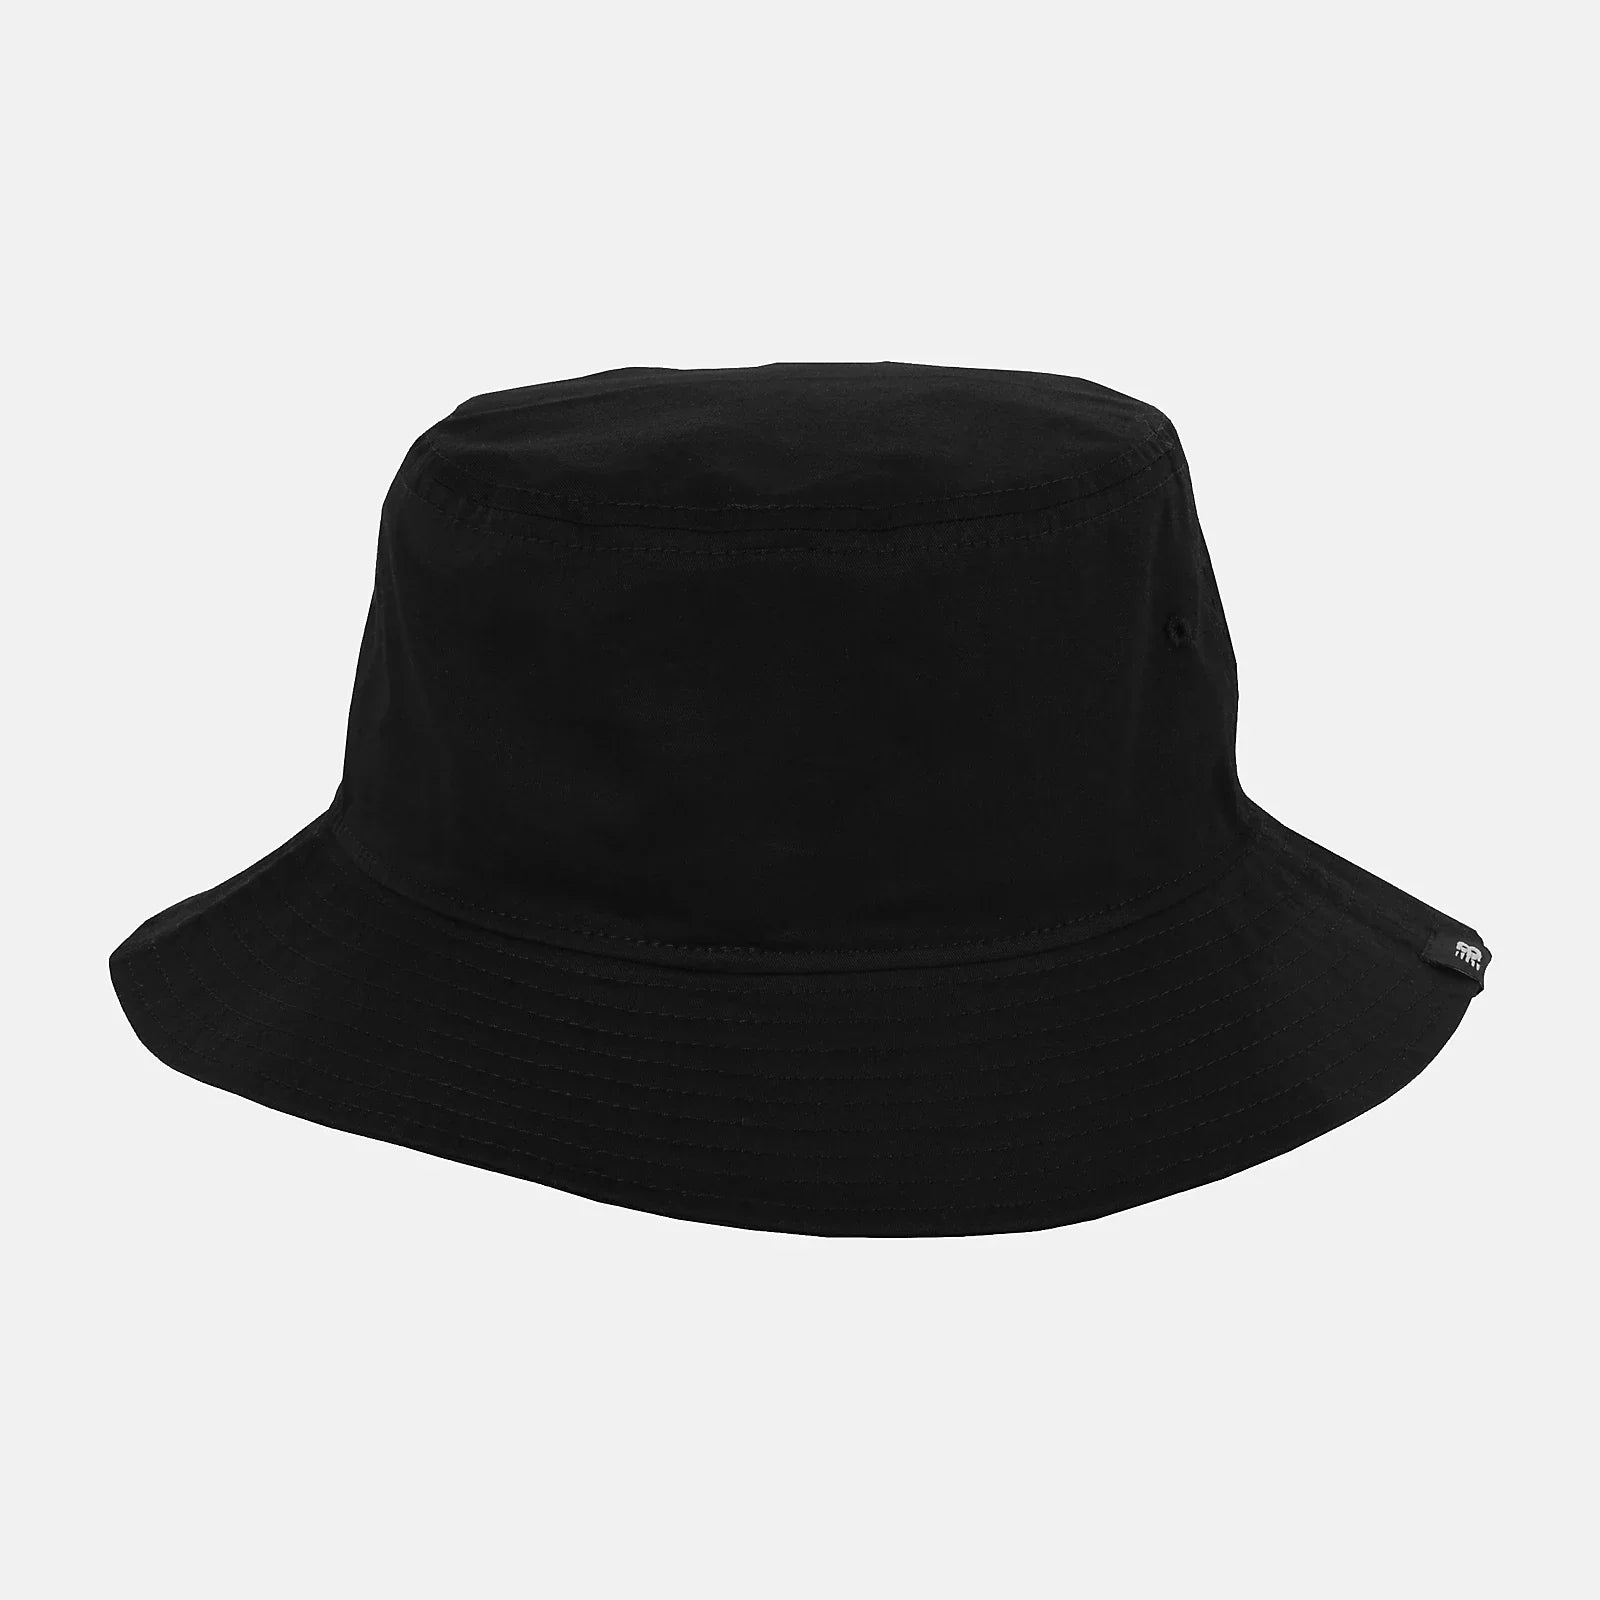 NEW BALANCE Bucket Hat in Black LAH13003 O/S BLACK FROM EIGHTYWINGOLD - OFFICIAL BRAND PARTNER